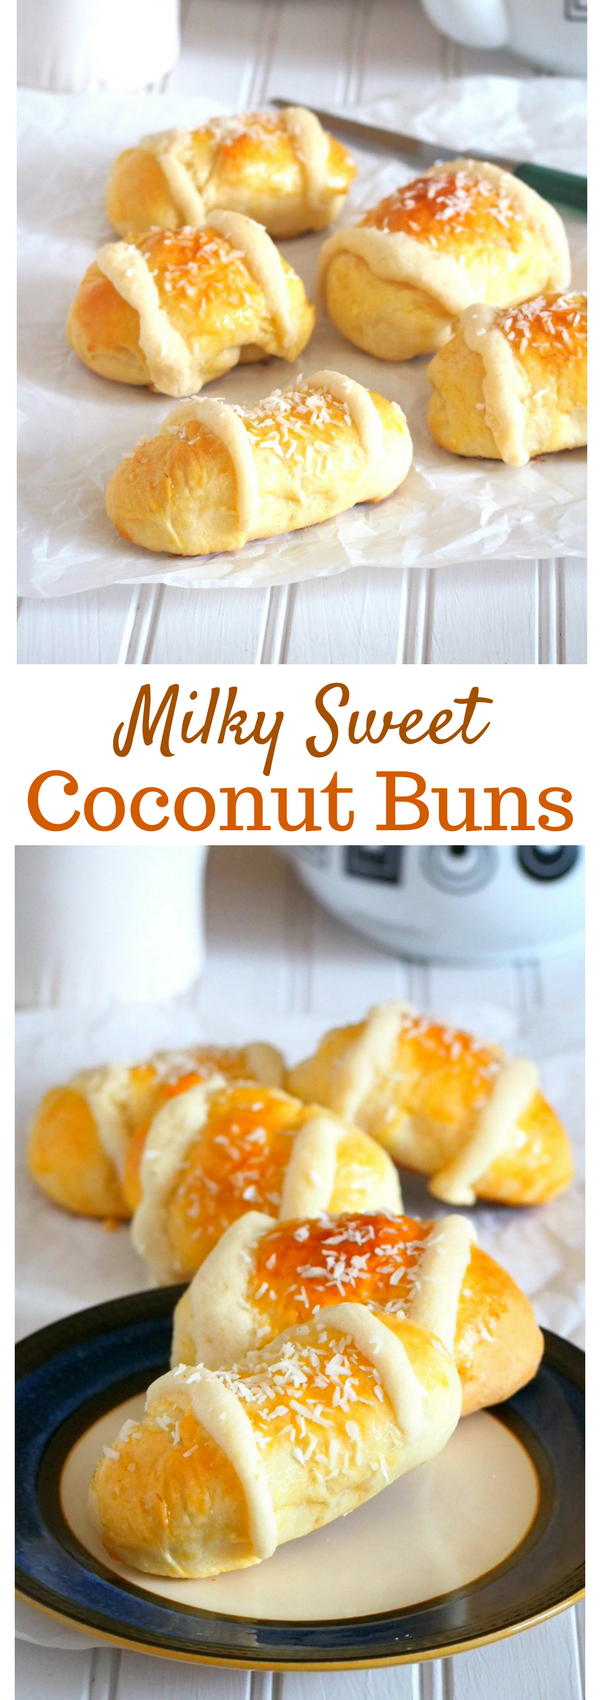 These Coconut Buns are filled with a milky and sweet coconut filling making them so flavorful and tasty.